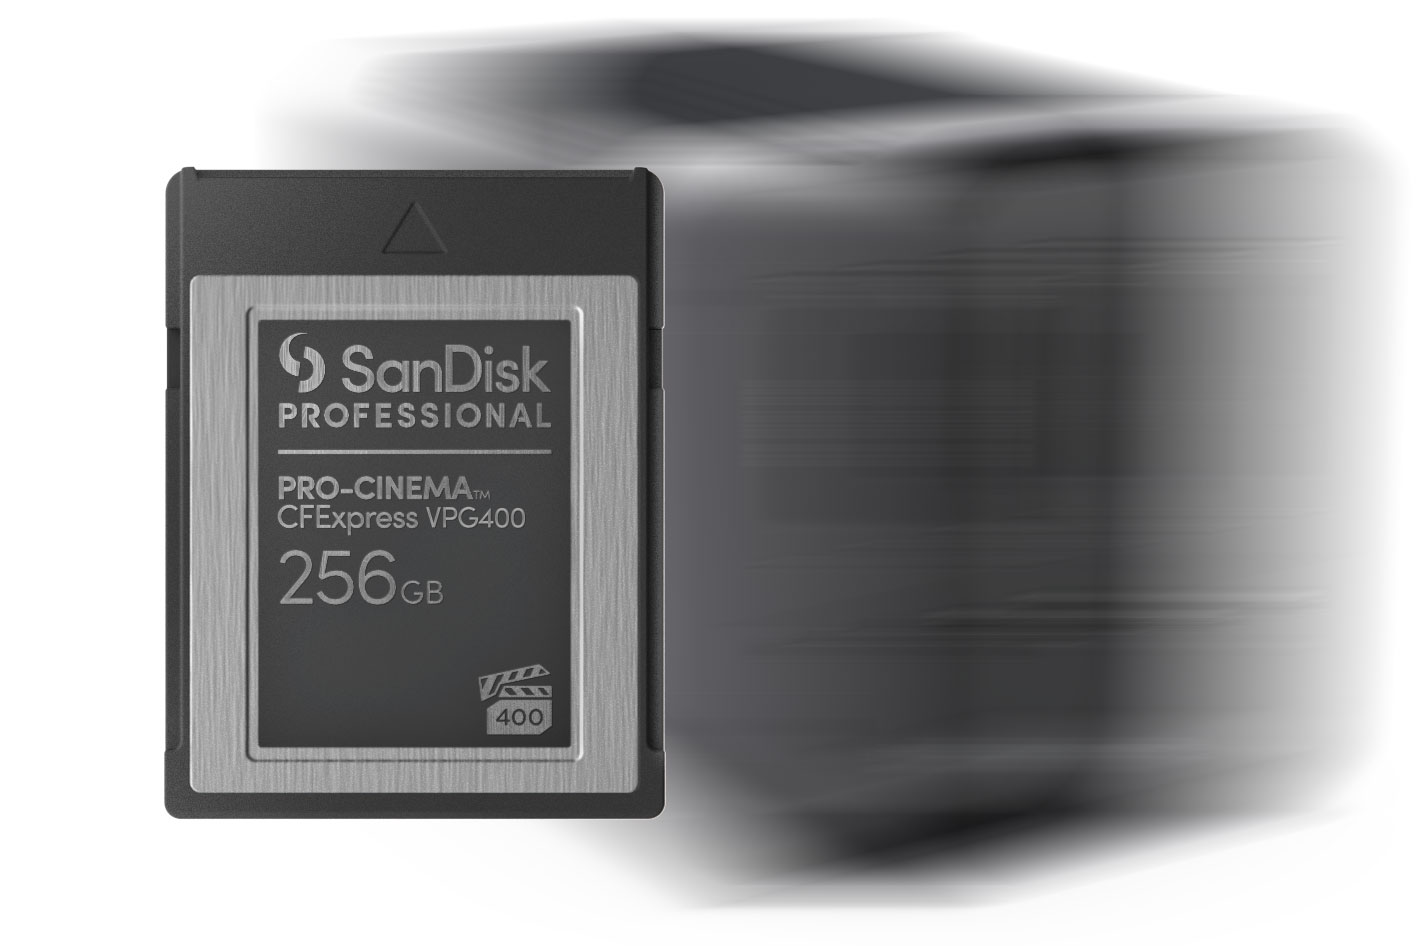 Western Digital launches SanDisk Professional brand